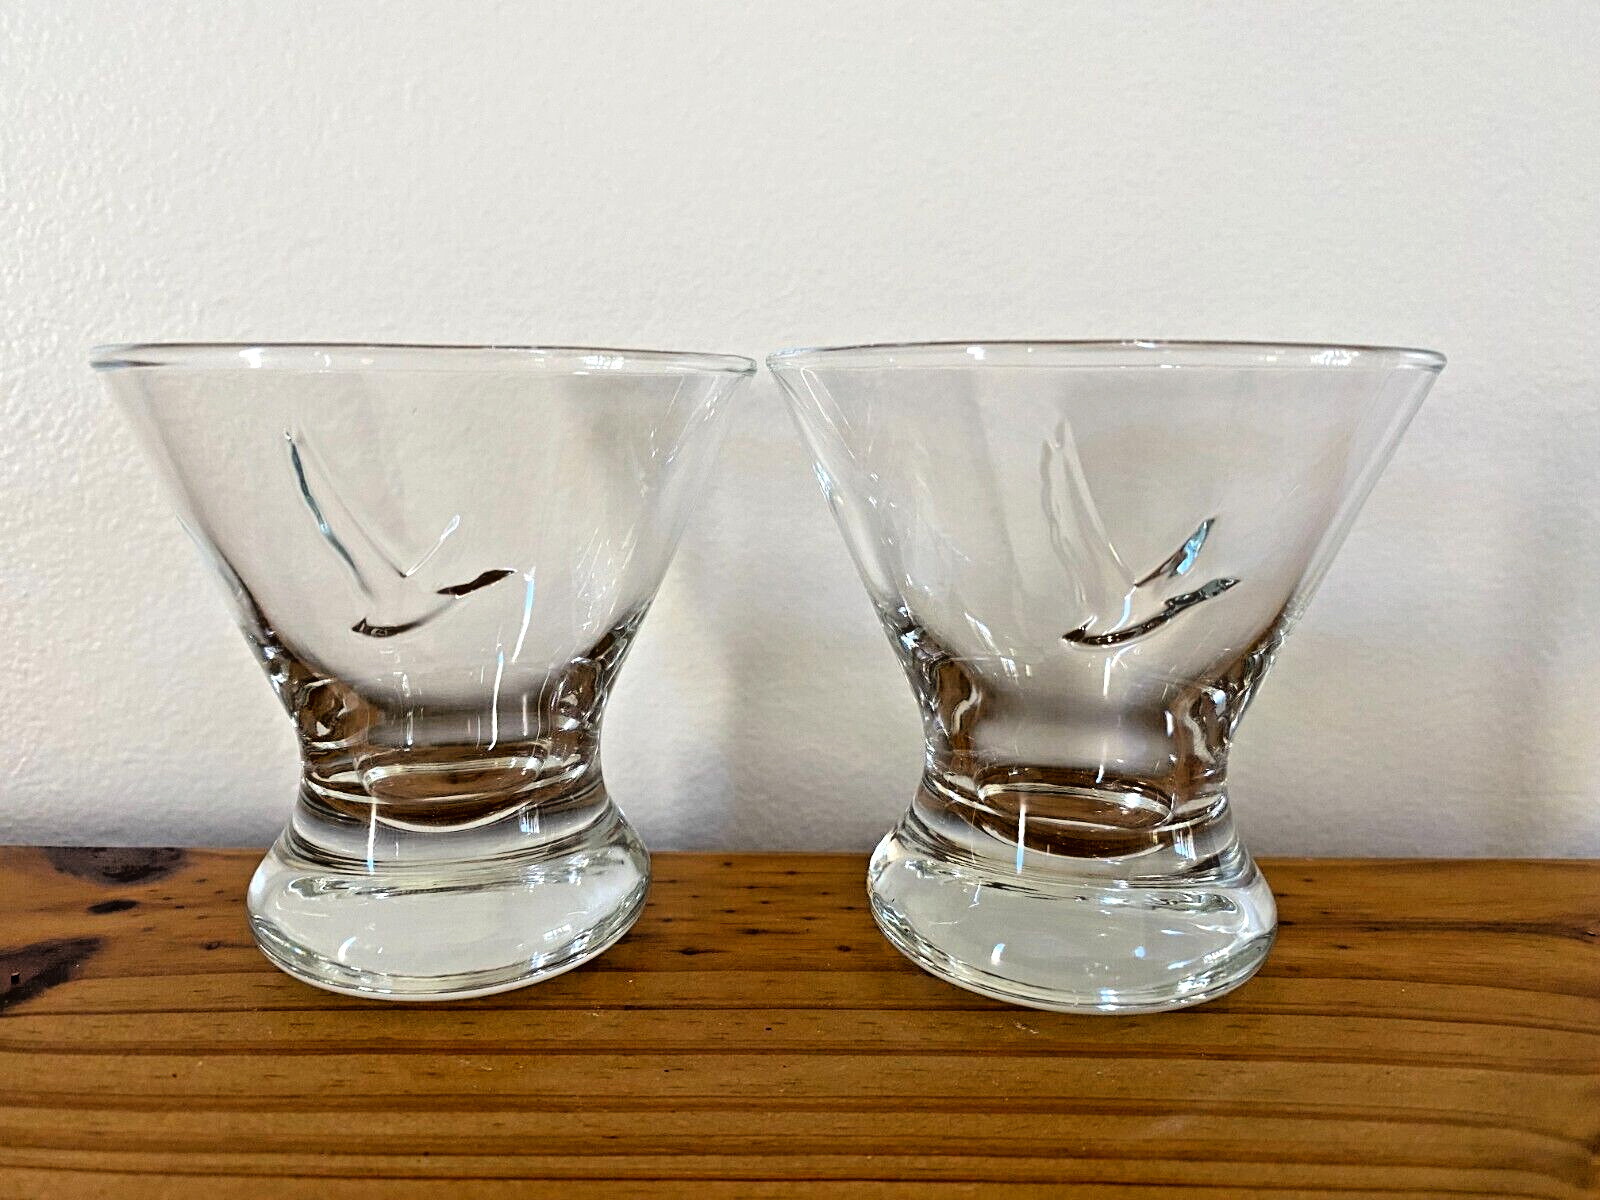 GREY GOOSE VODKA Stemless MARTINI Cocktail Glasses Special Edition - Set of 2